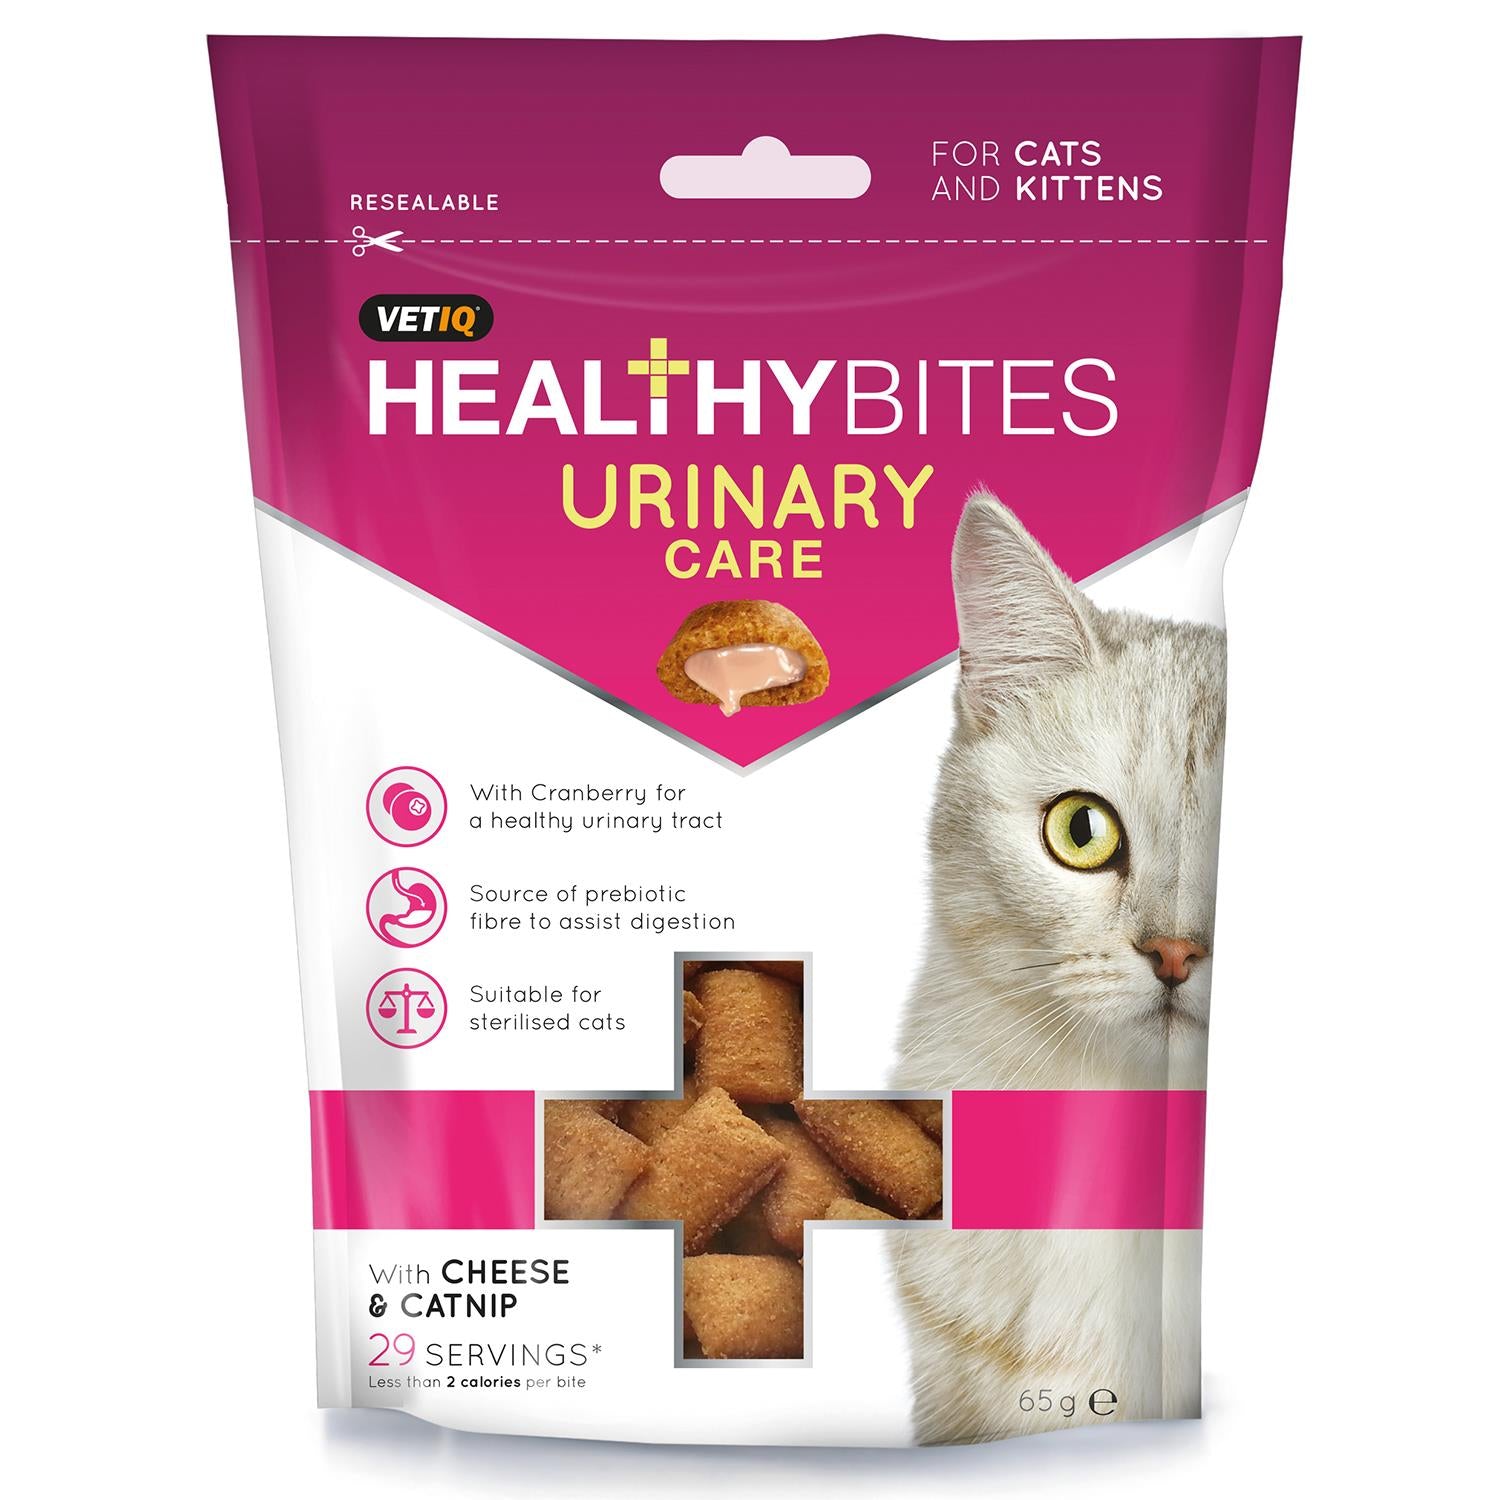 Vetiq Healthy Bites Urinary Care For Cats & Kittens - Just Horse Riders